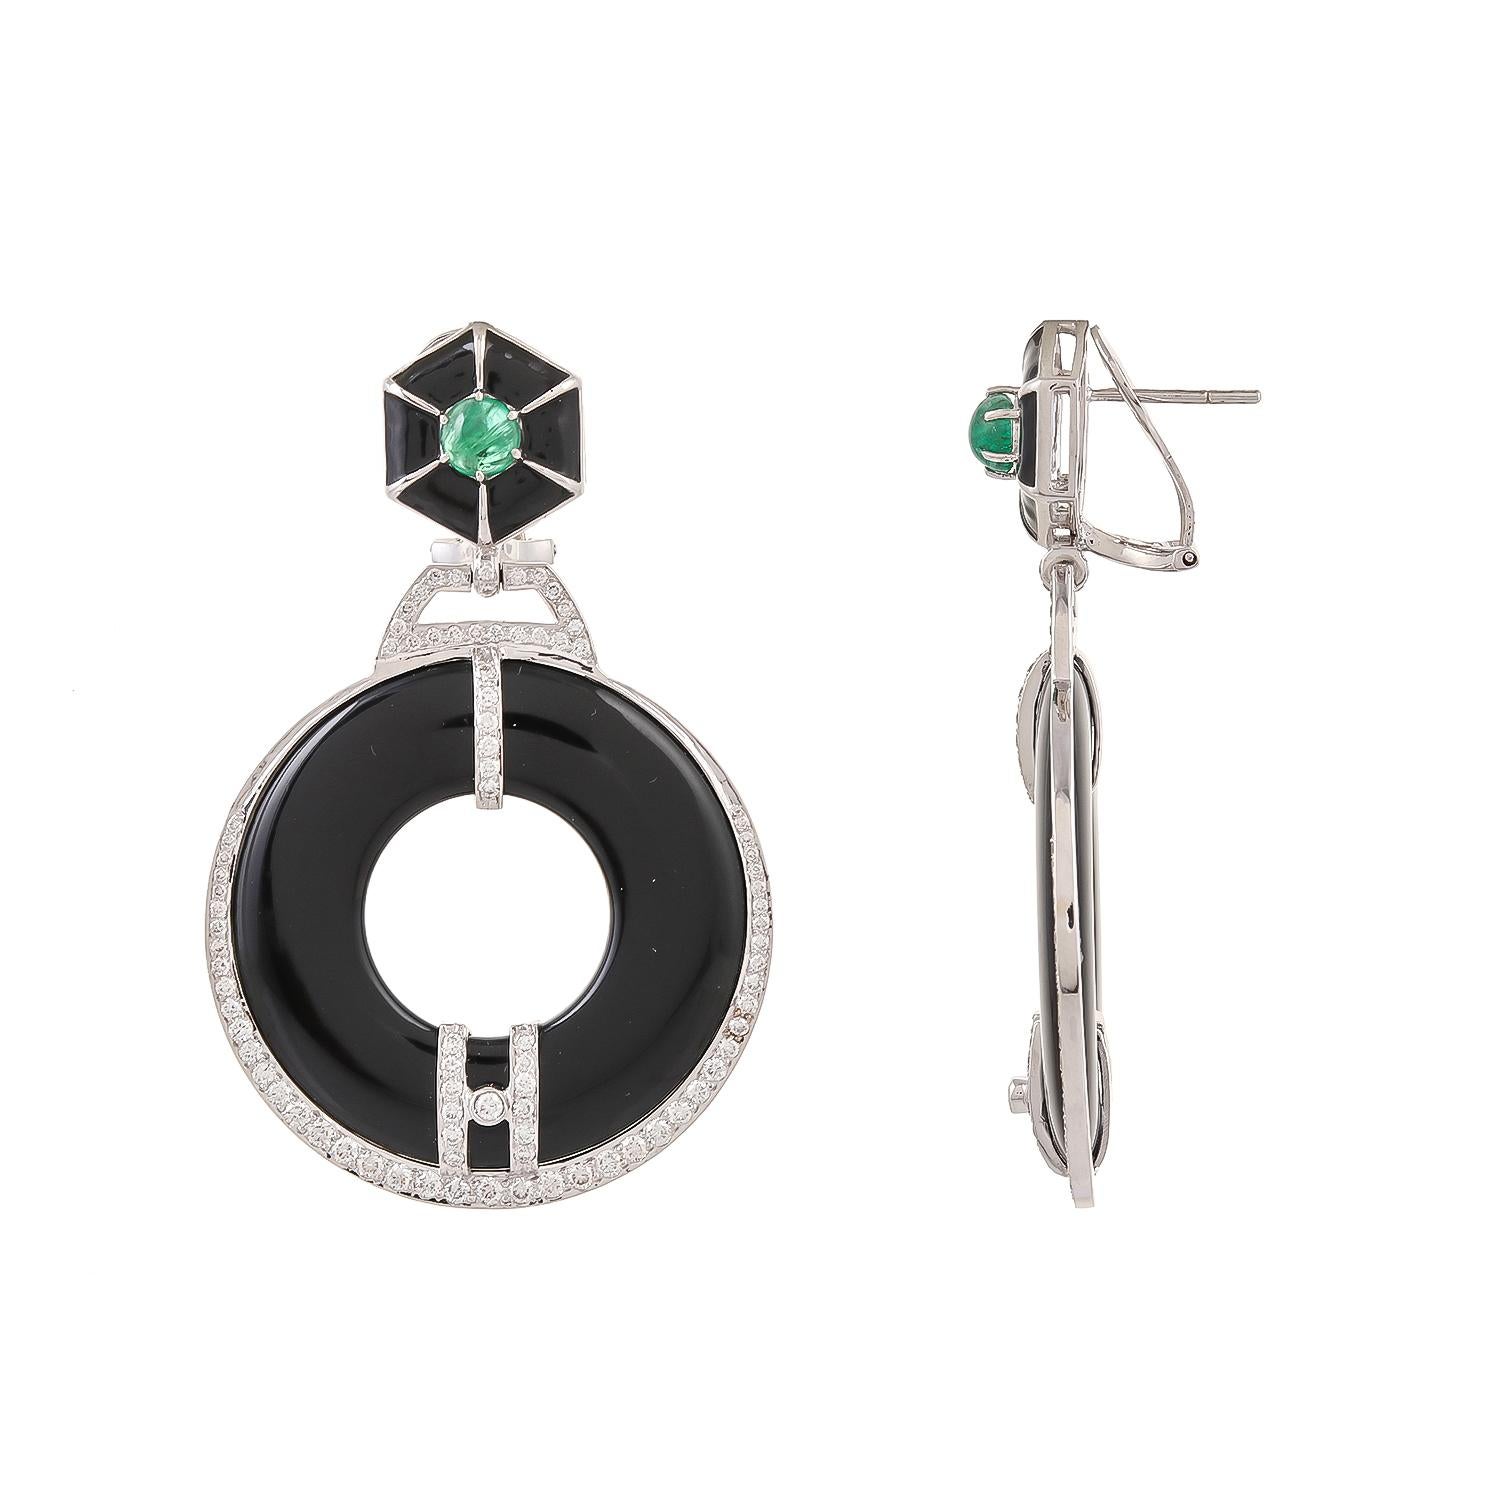 A captivating 18 karats white gold earring boldly features glossy black onyx weighing 59.55 carats approximately, is accented by brilliant 2.14 carats round diamonds. The studded emerald weighing 1.38 carats approximately is coupled with black